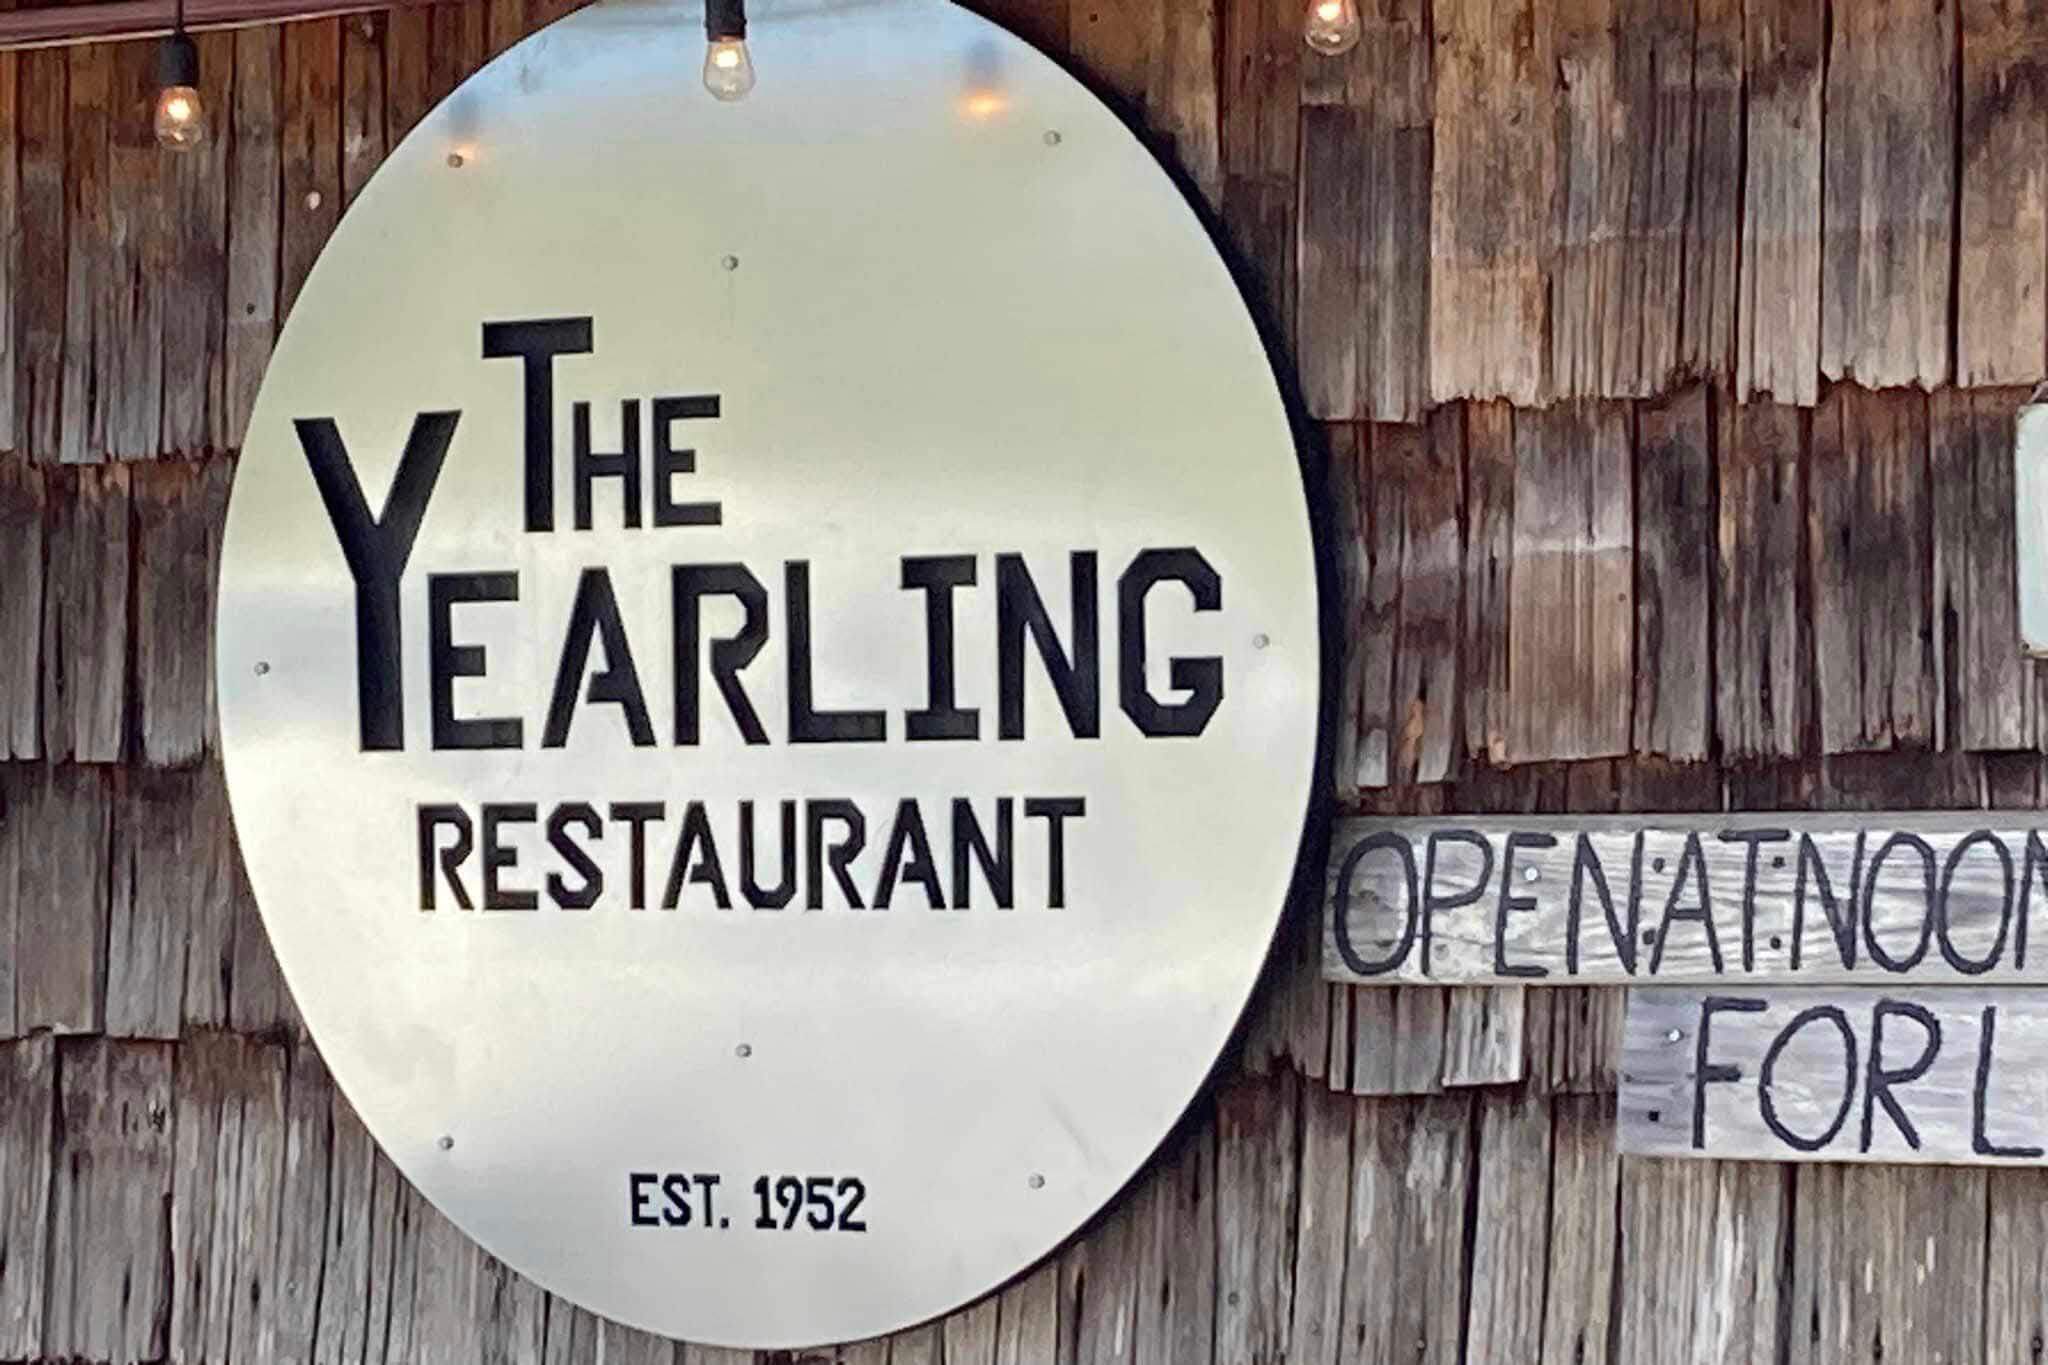 The Yearling Restaurant Sign